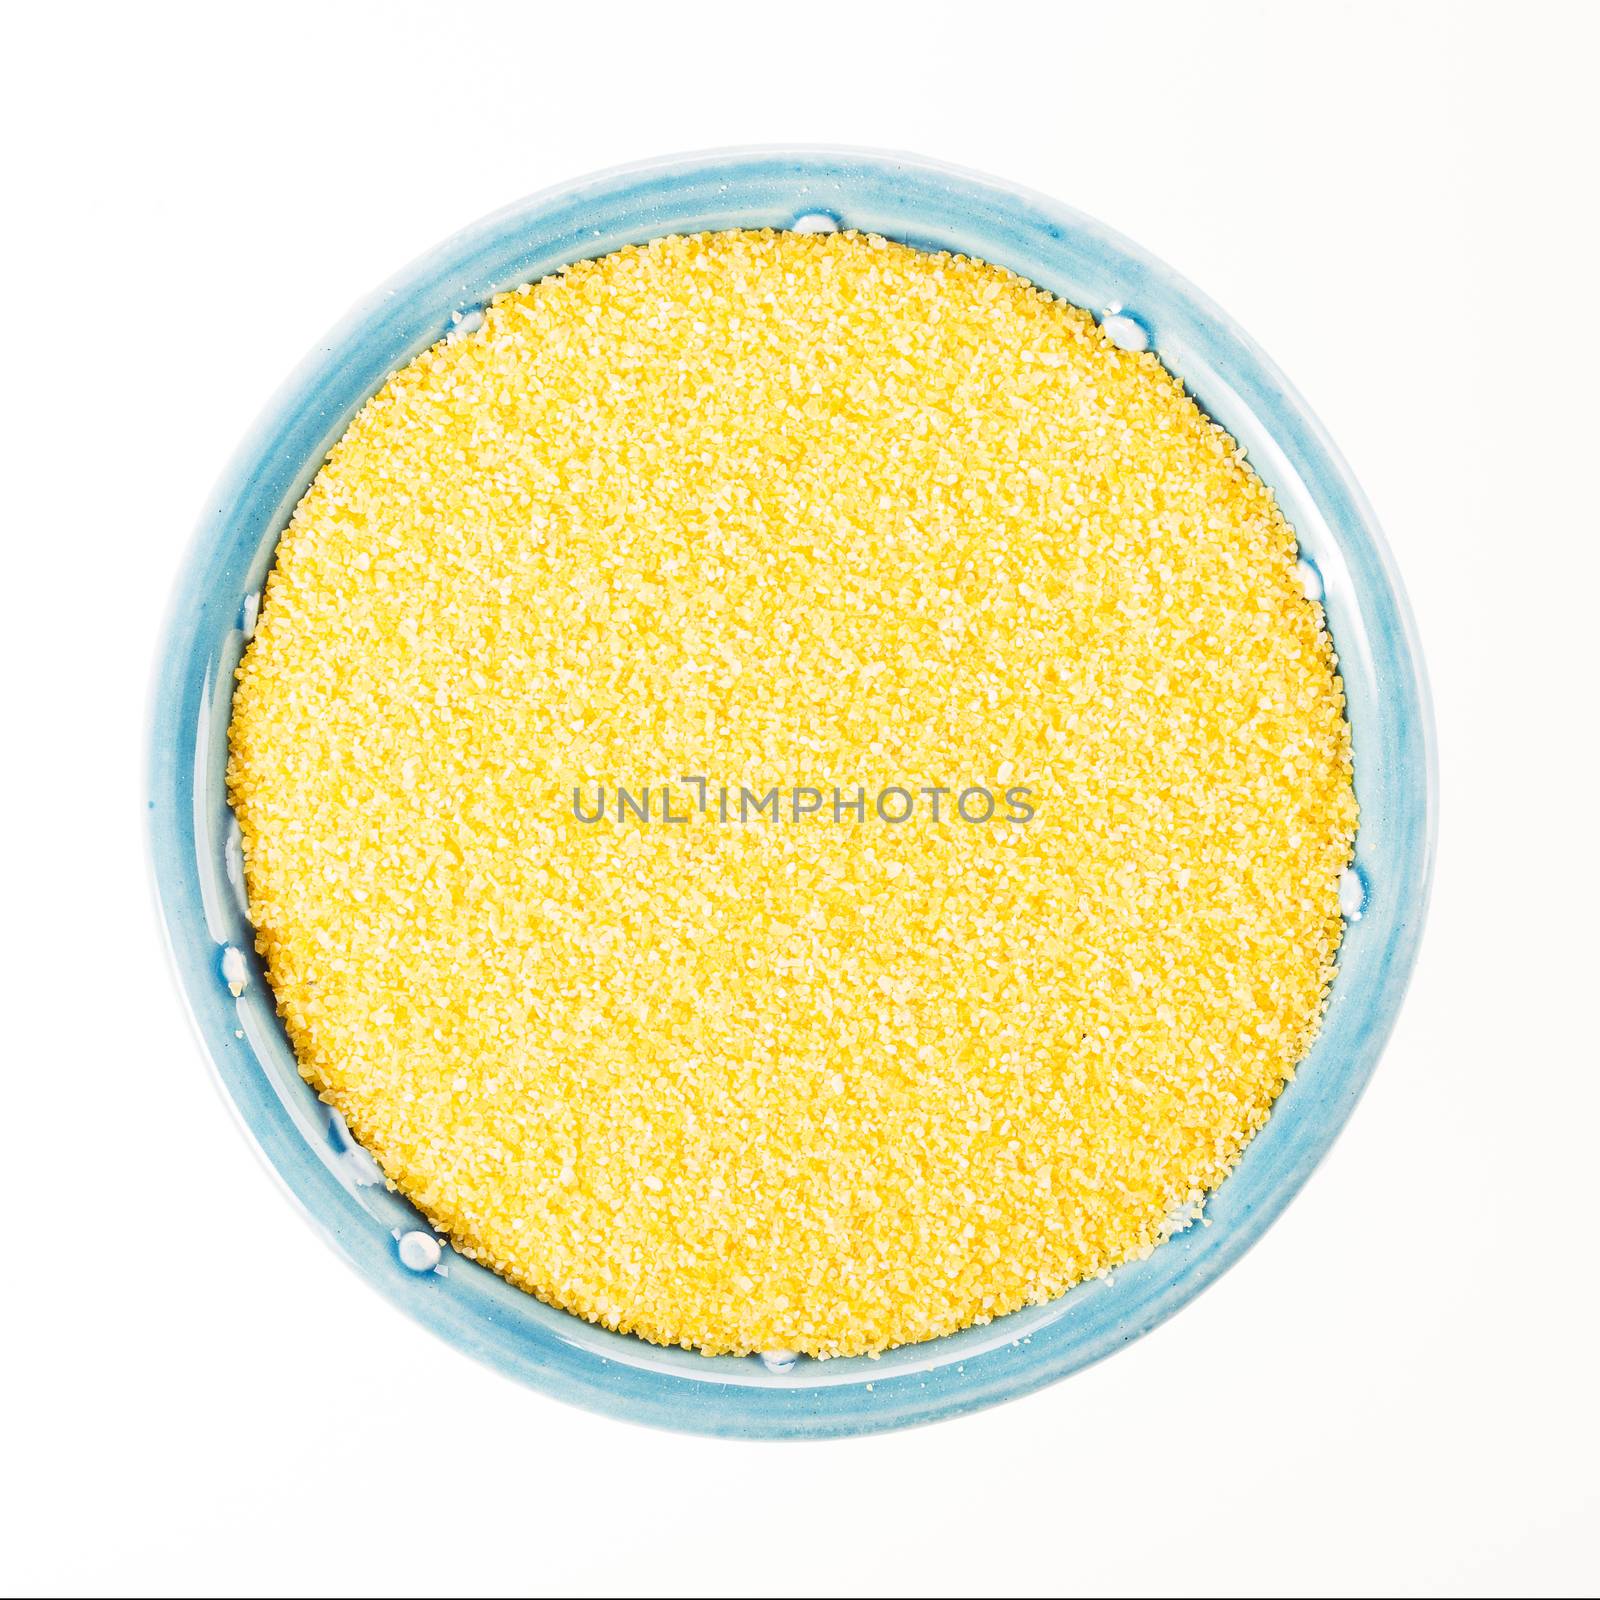 Raw polenta in blue bowl isolated on white background, viewed from directly above.